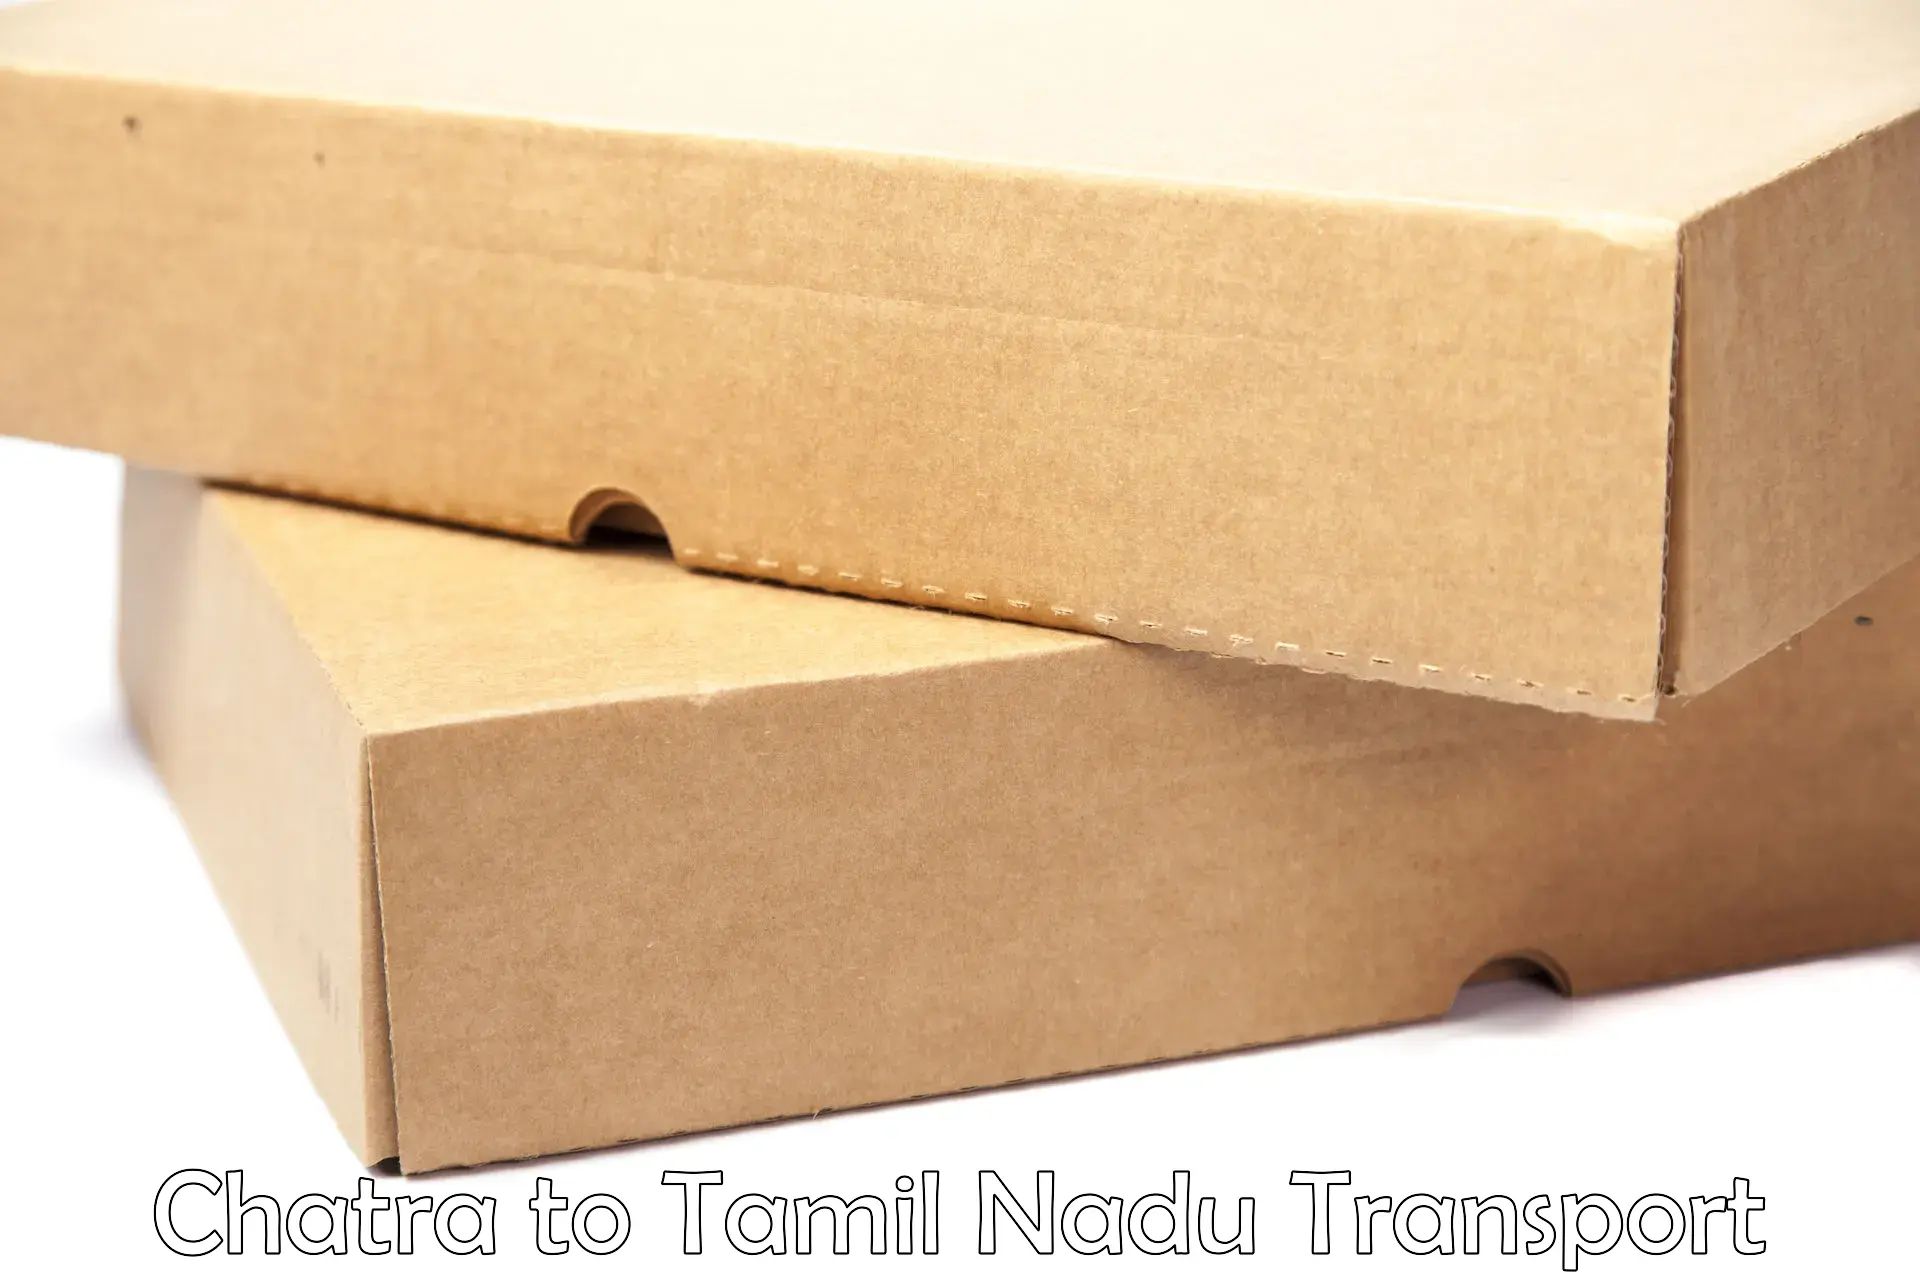 Truck transport companies in India Chatra to Bodinayakanur